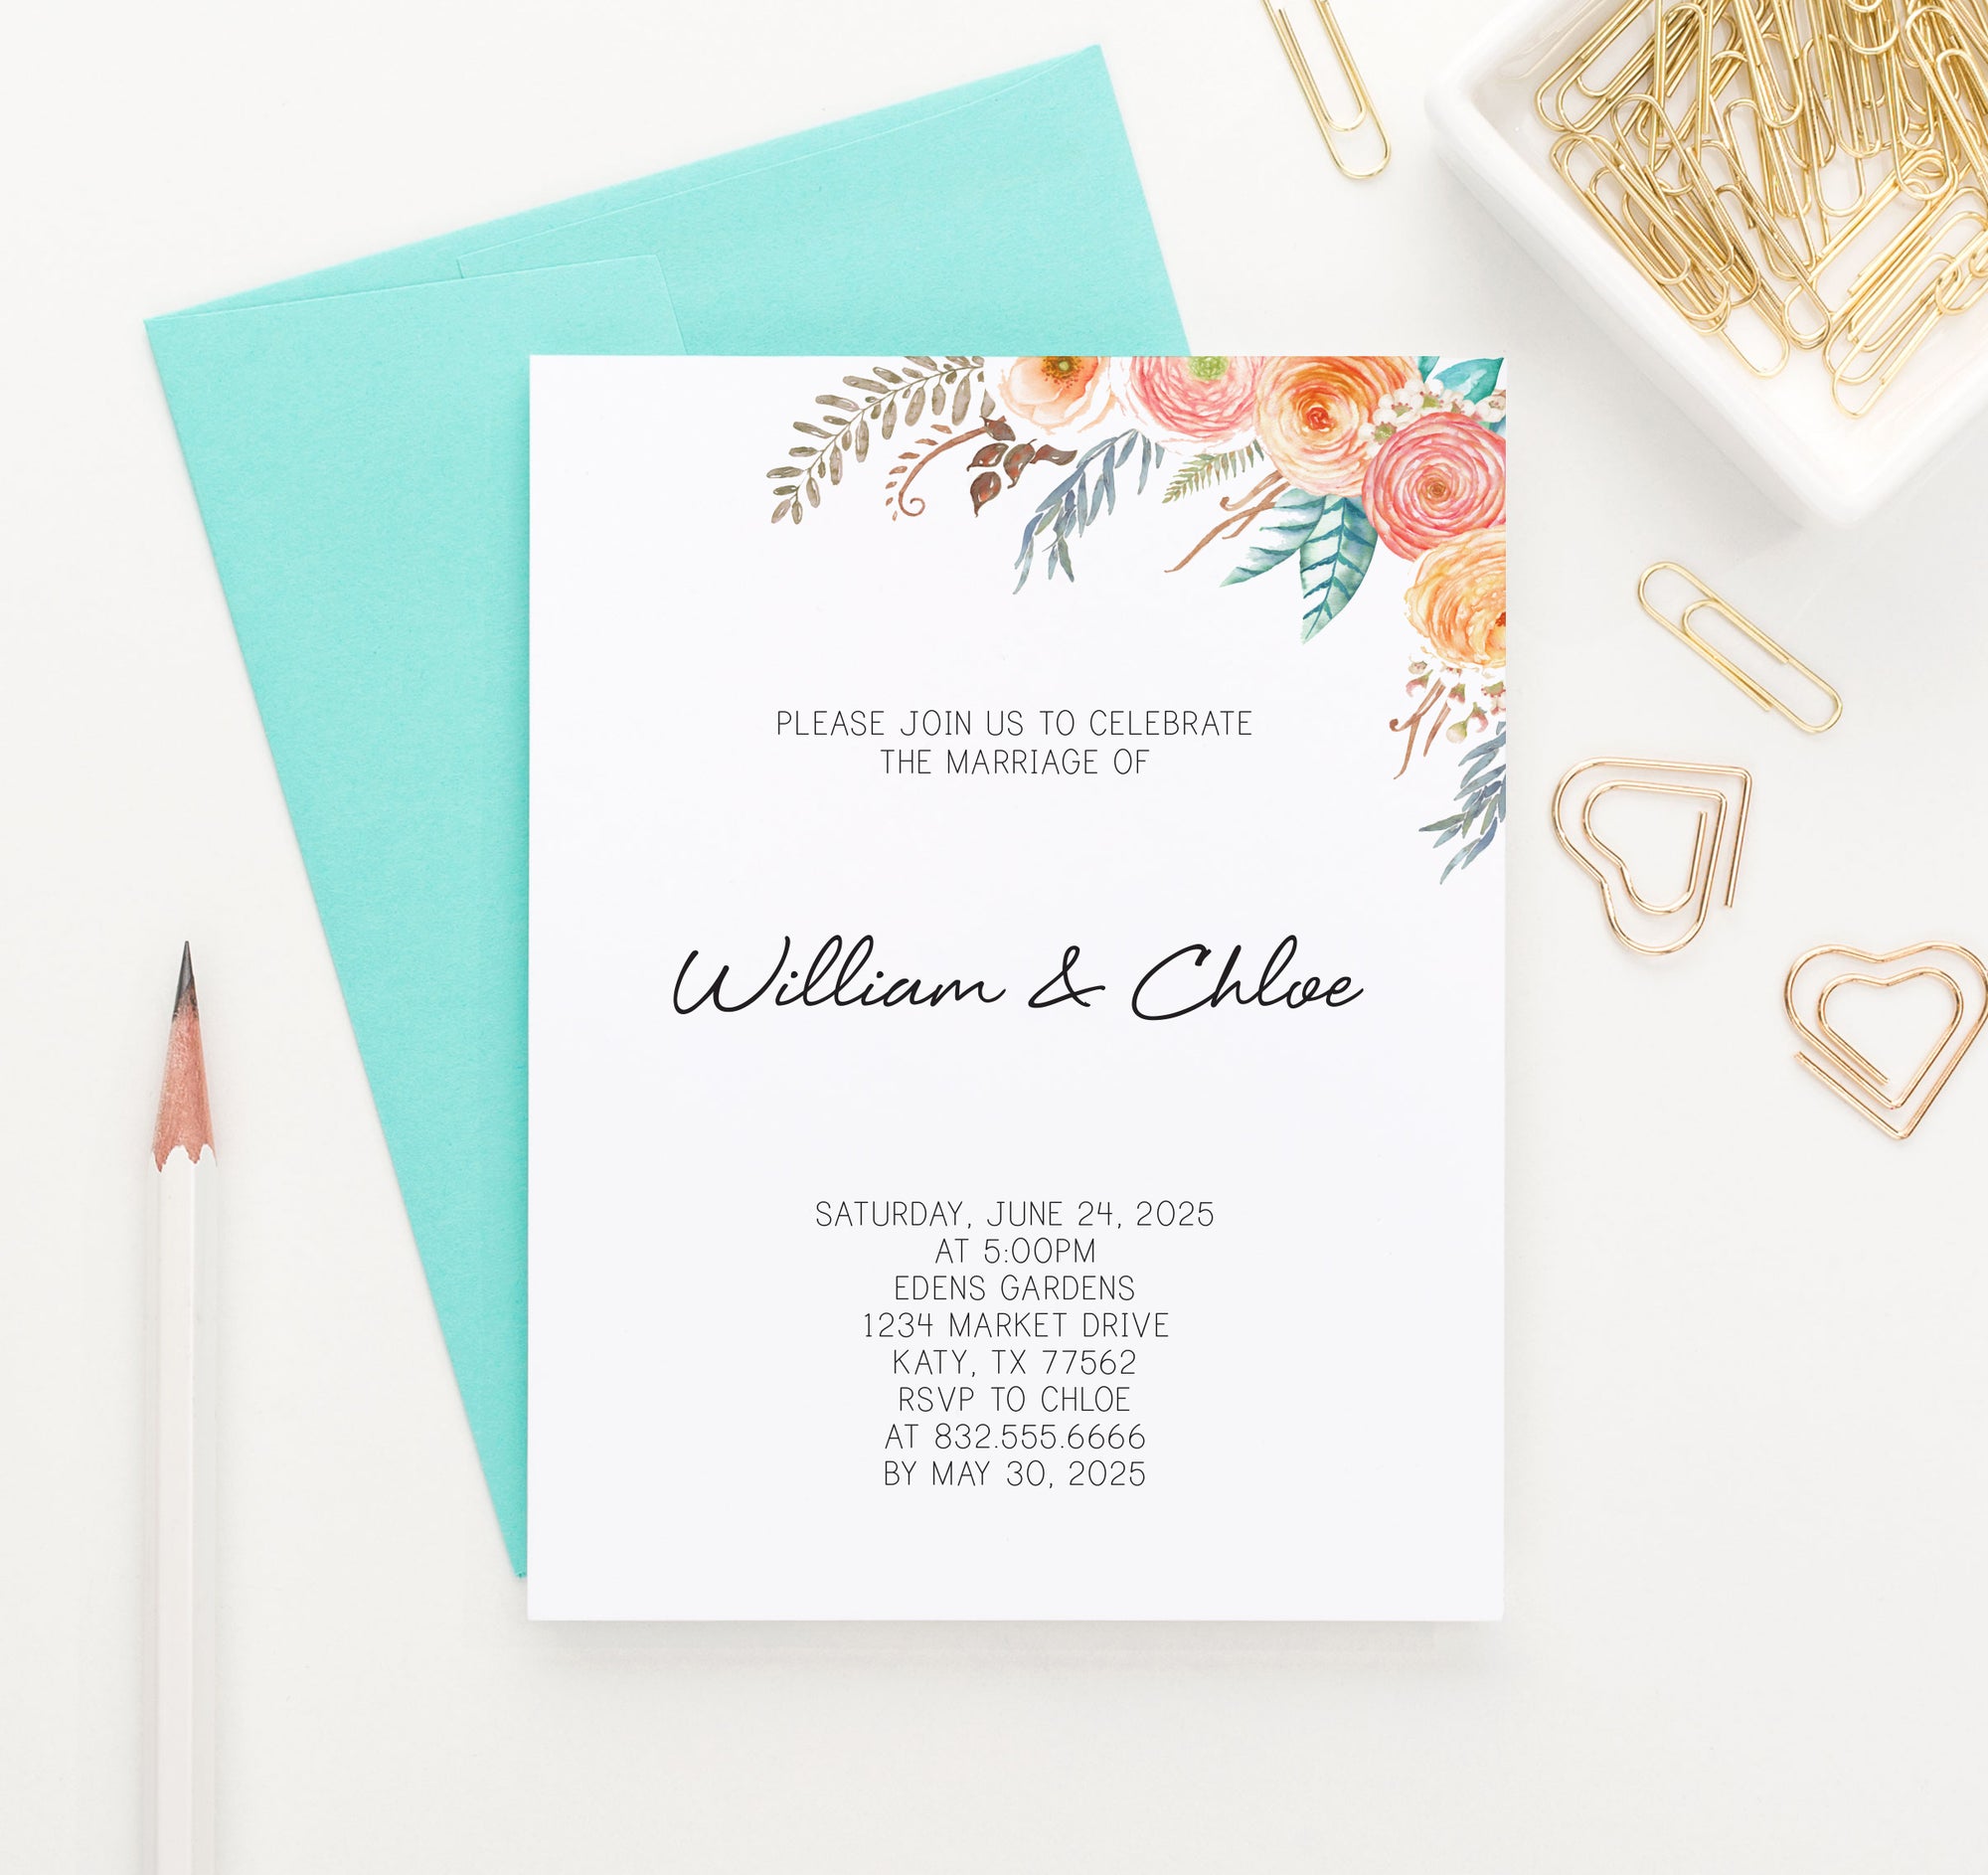 WI062 Cute Bohemian Floral Wedding Invites Personalized boho marriage invitations florals flower flowers